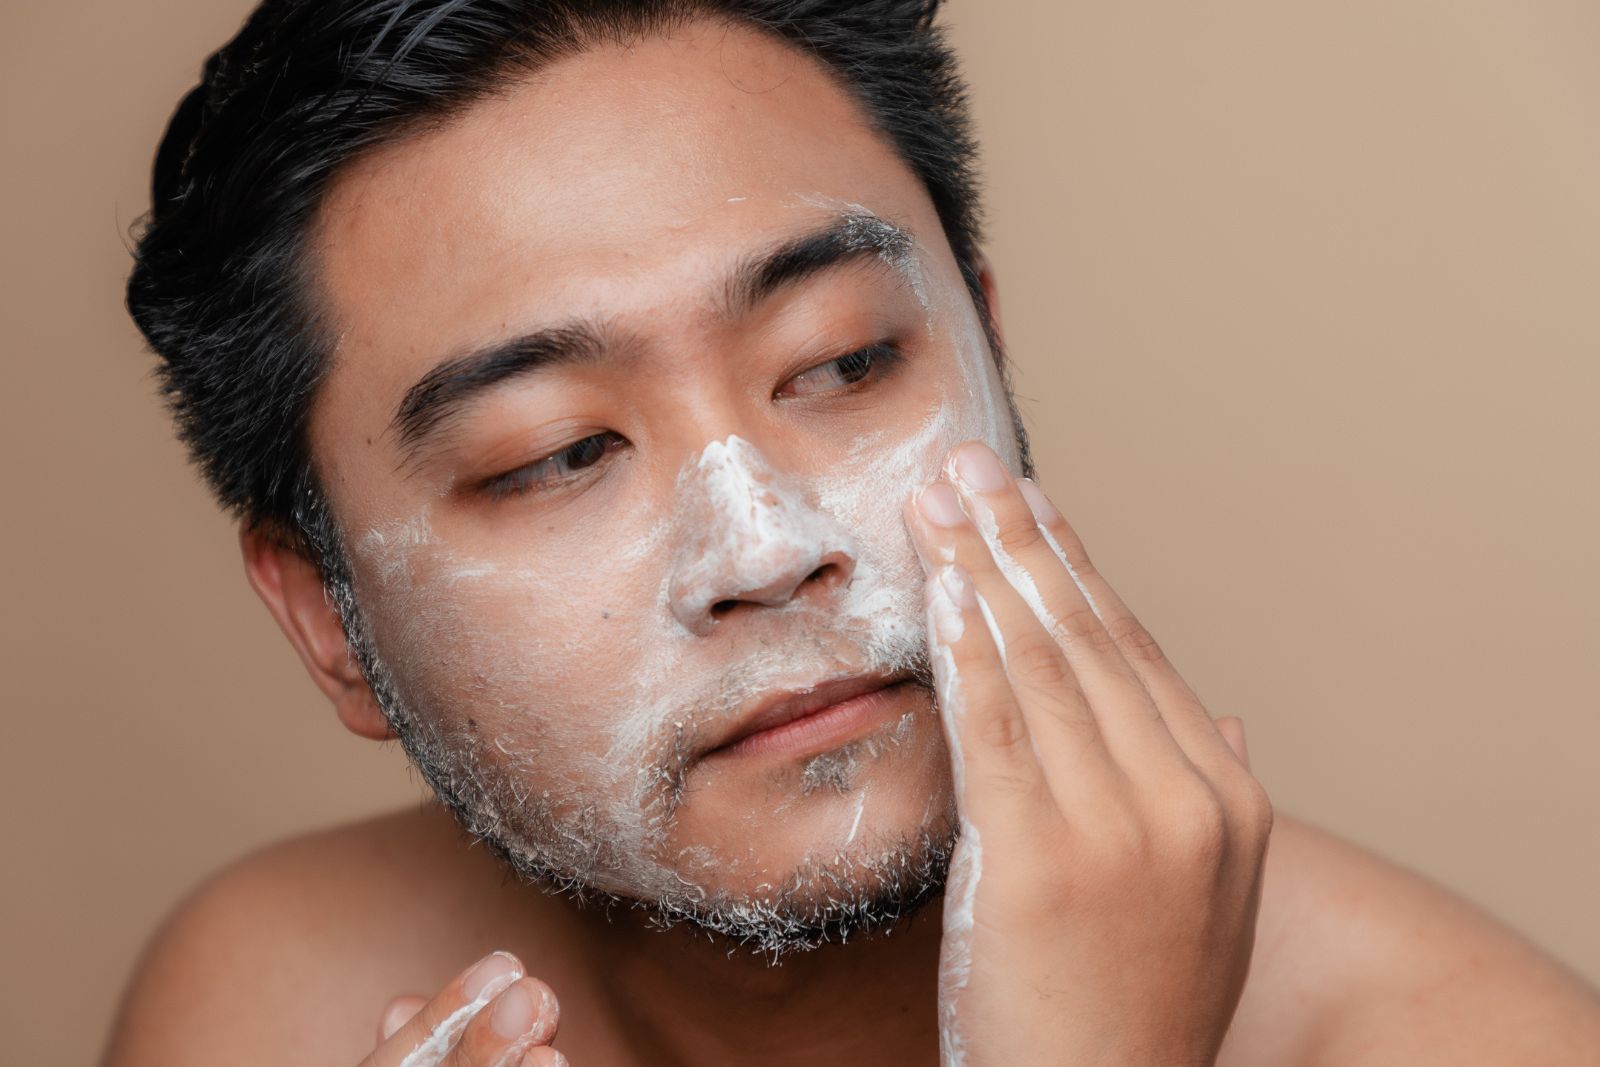 Guy using Cleanser for his face